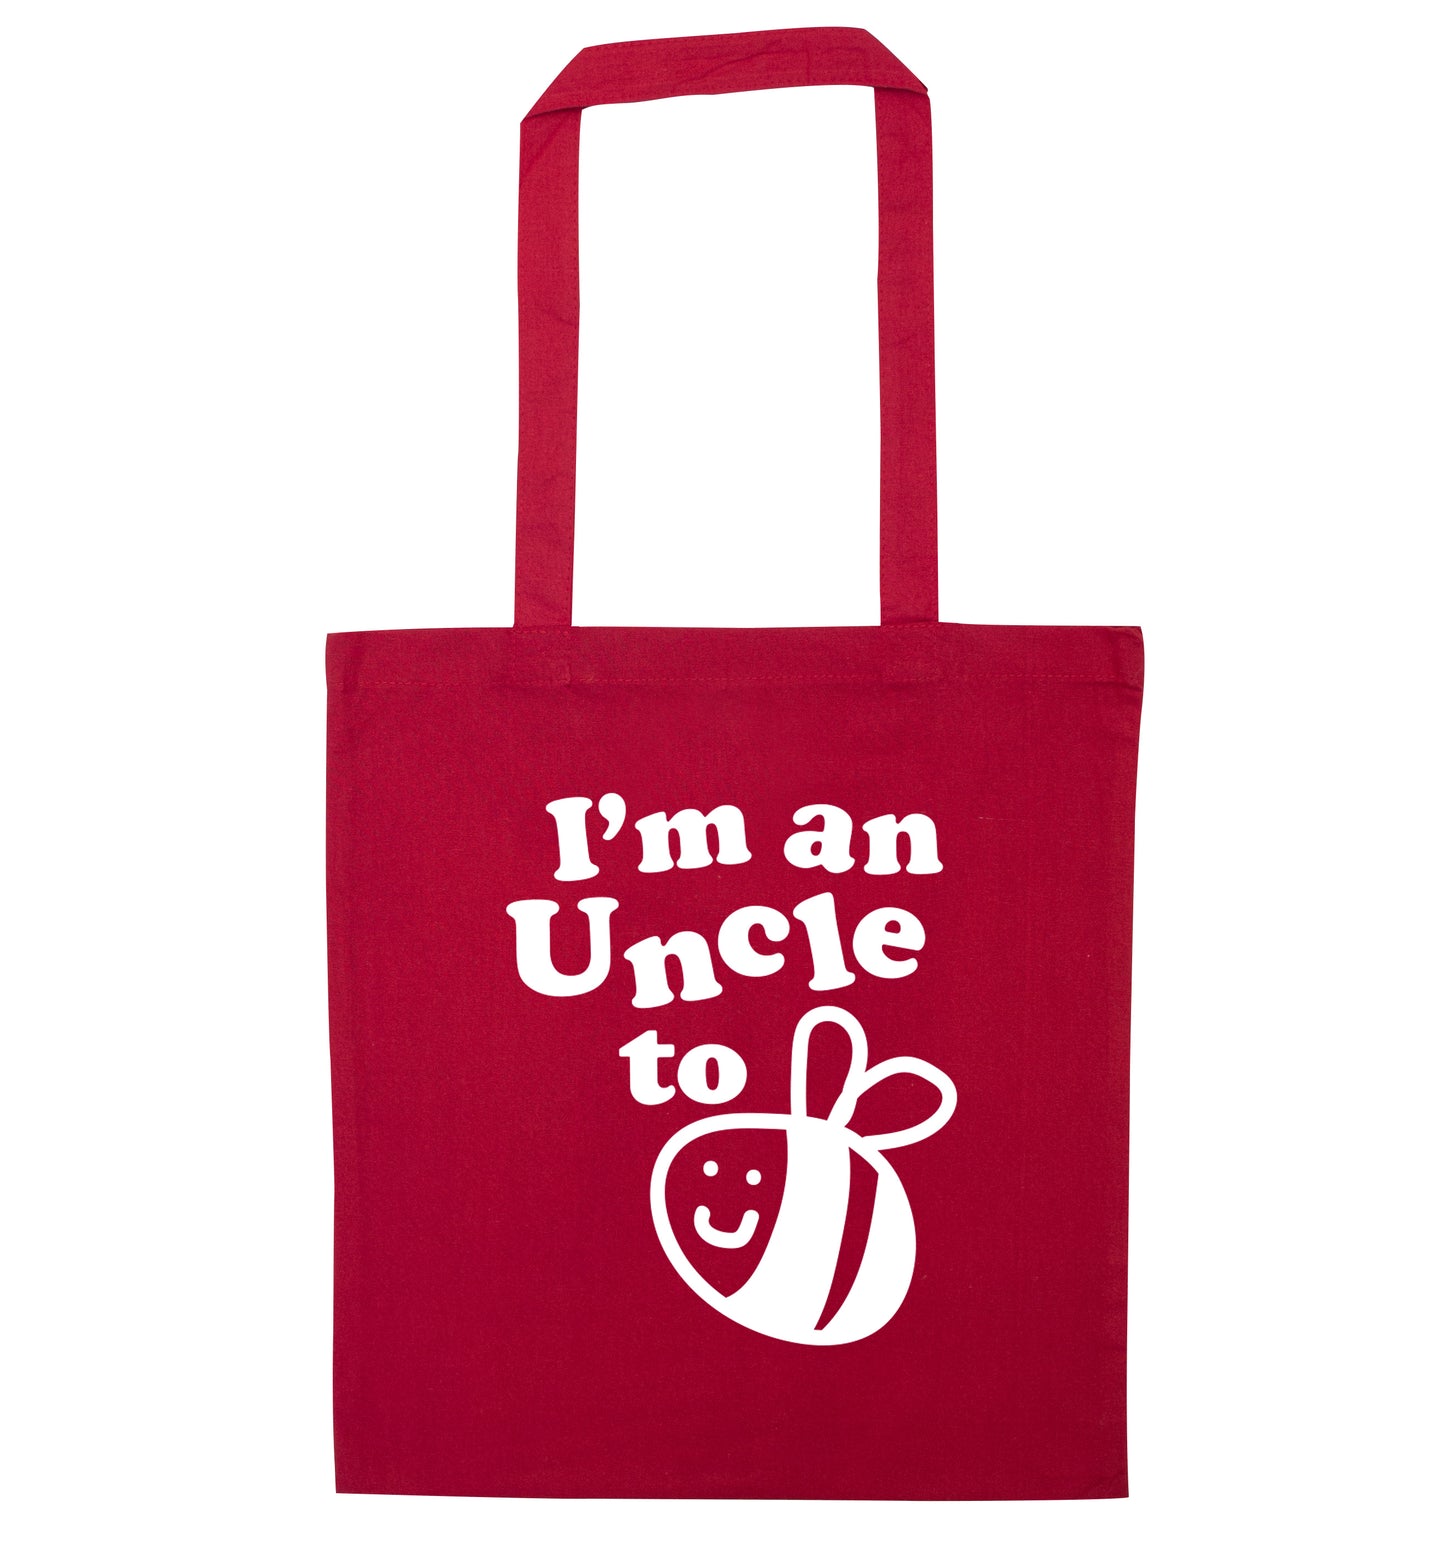 I'm an uncle to be red tote bag